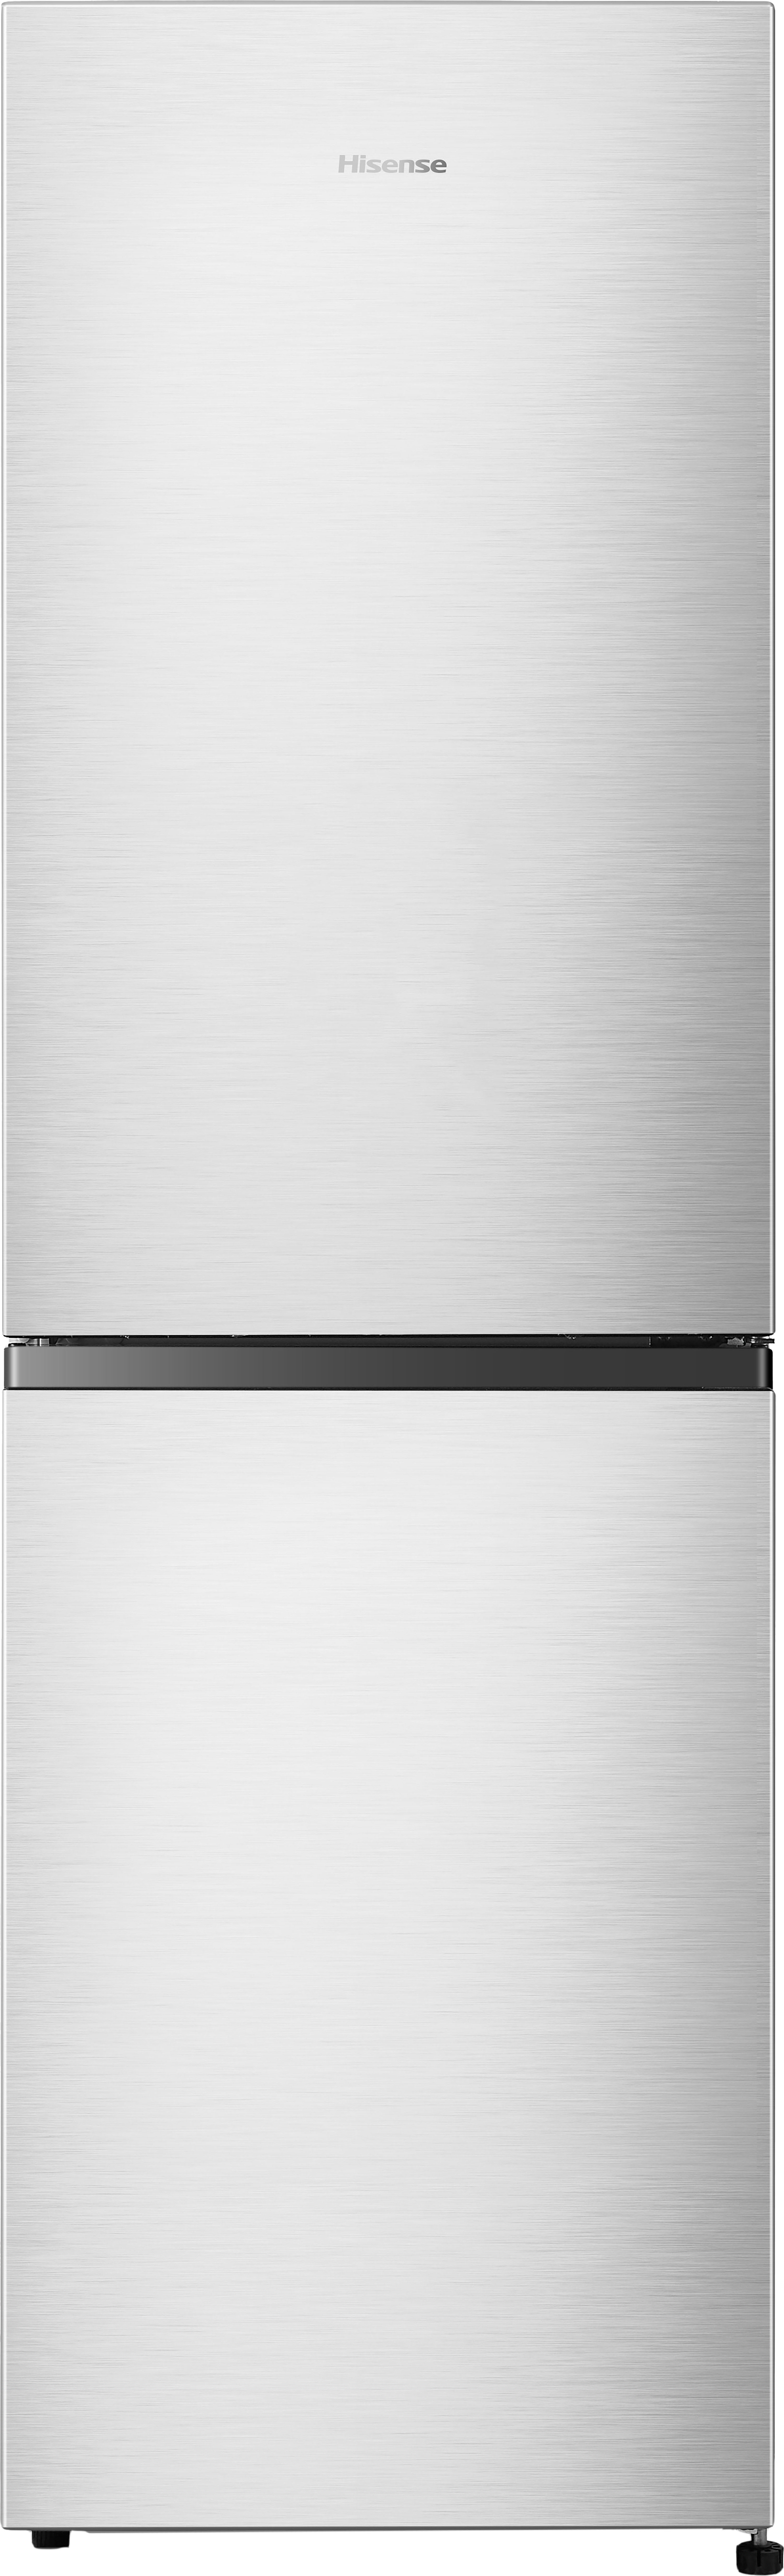 Hisense RB327N4BCE 50/50 No Frost Fridge Freezer - Stainless Steel - E Rated, Stainless Steel